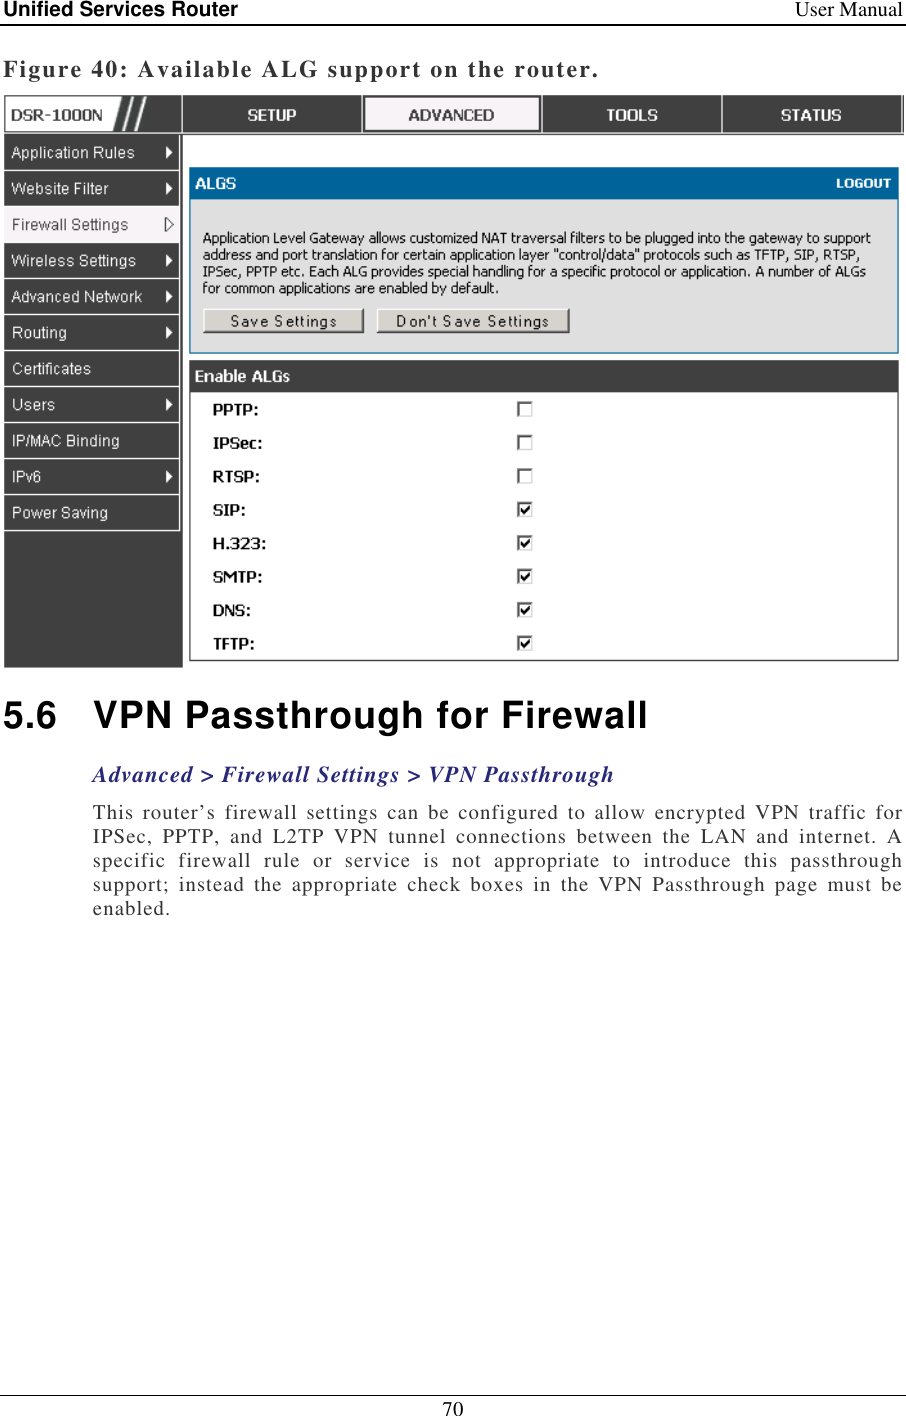 Unified Services Router    User Manual 70  Figure 40: Available ALG support on the router.  5.6  VPN Passthrough for Firewall Advanced &gt; Firewall Settings &gt; VPN Passthrough This  router’s  firewall  settings  can  be  configured  to  allow  encrypted  VPN  traffic  for IPSec,  PPTP,  and  L2TP  VPN  tunnel  connections  between  the  LAN  and  internet.  A specific  firewall  rule  or  service  is  not  appropriate  to  introduce  this  passthrough support;  instead  the  appropriate  check  boxes  in  the  VPN  Passthrough  page  must  be enabled.  